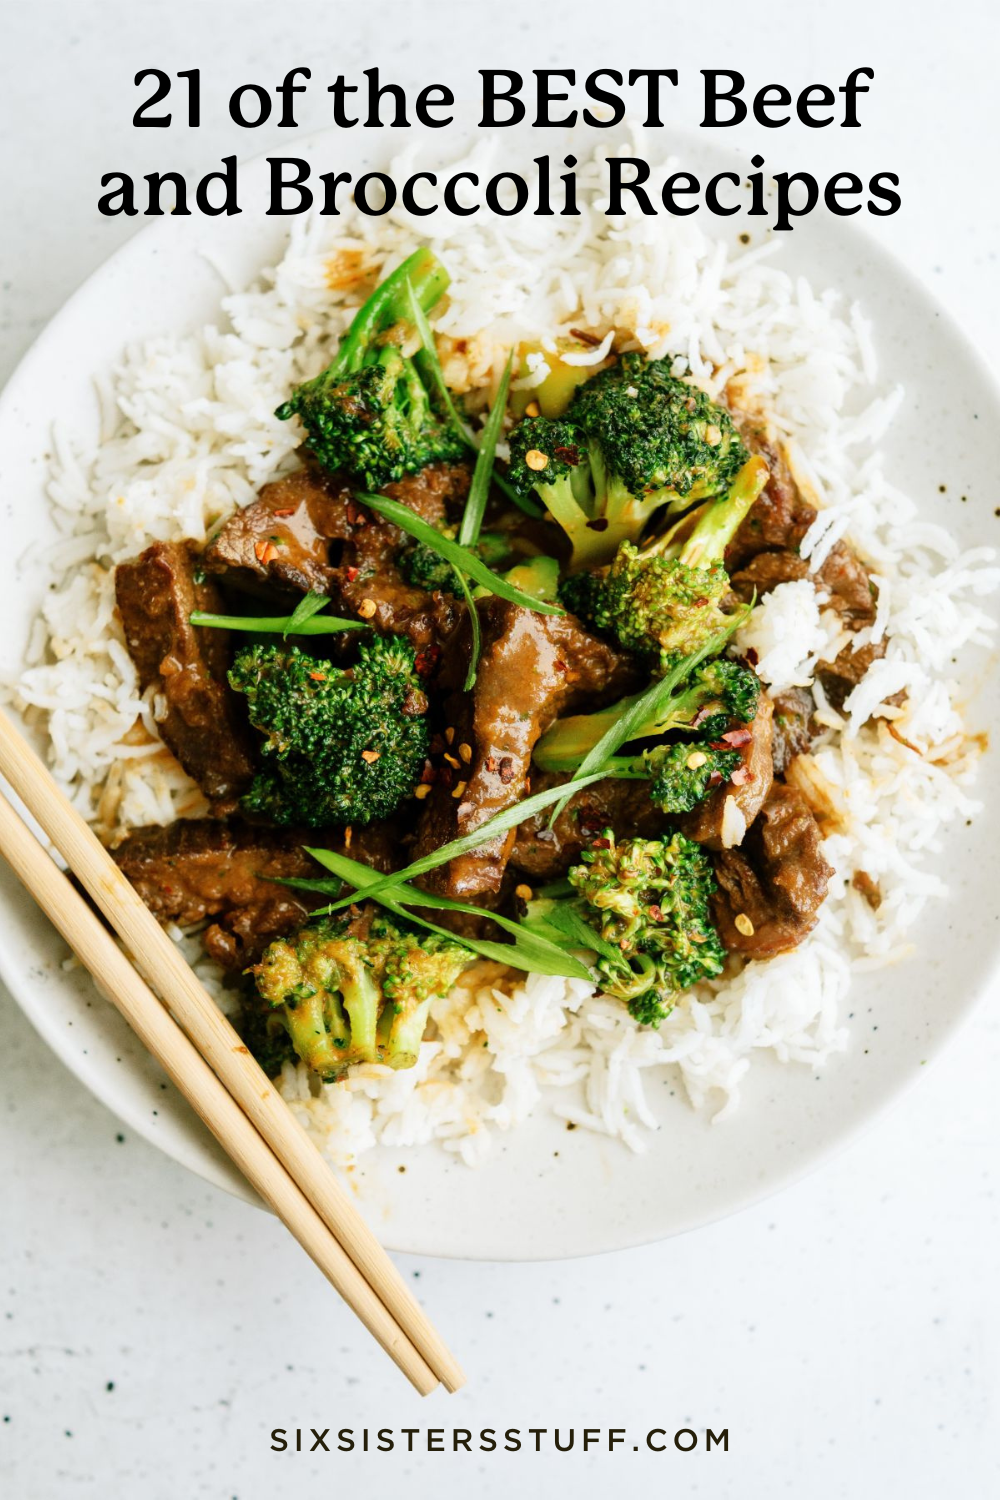 21 of the BEST Beef and Broccoli Recipes